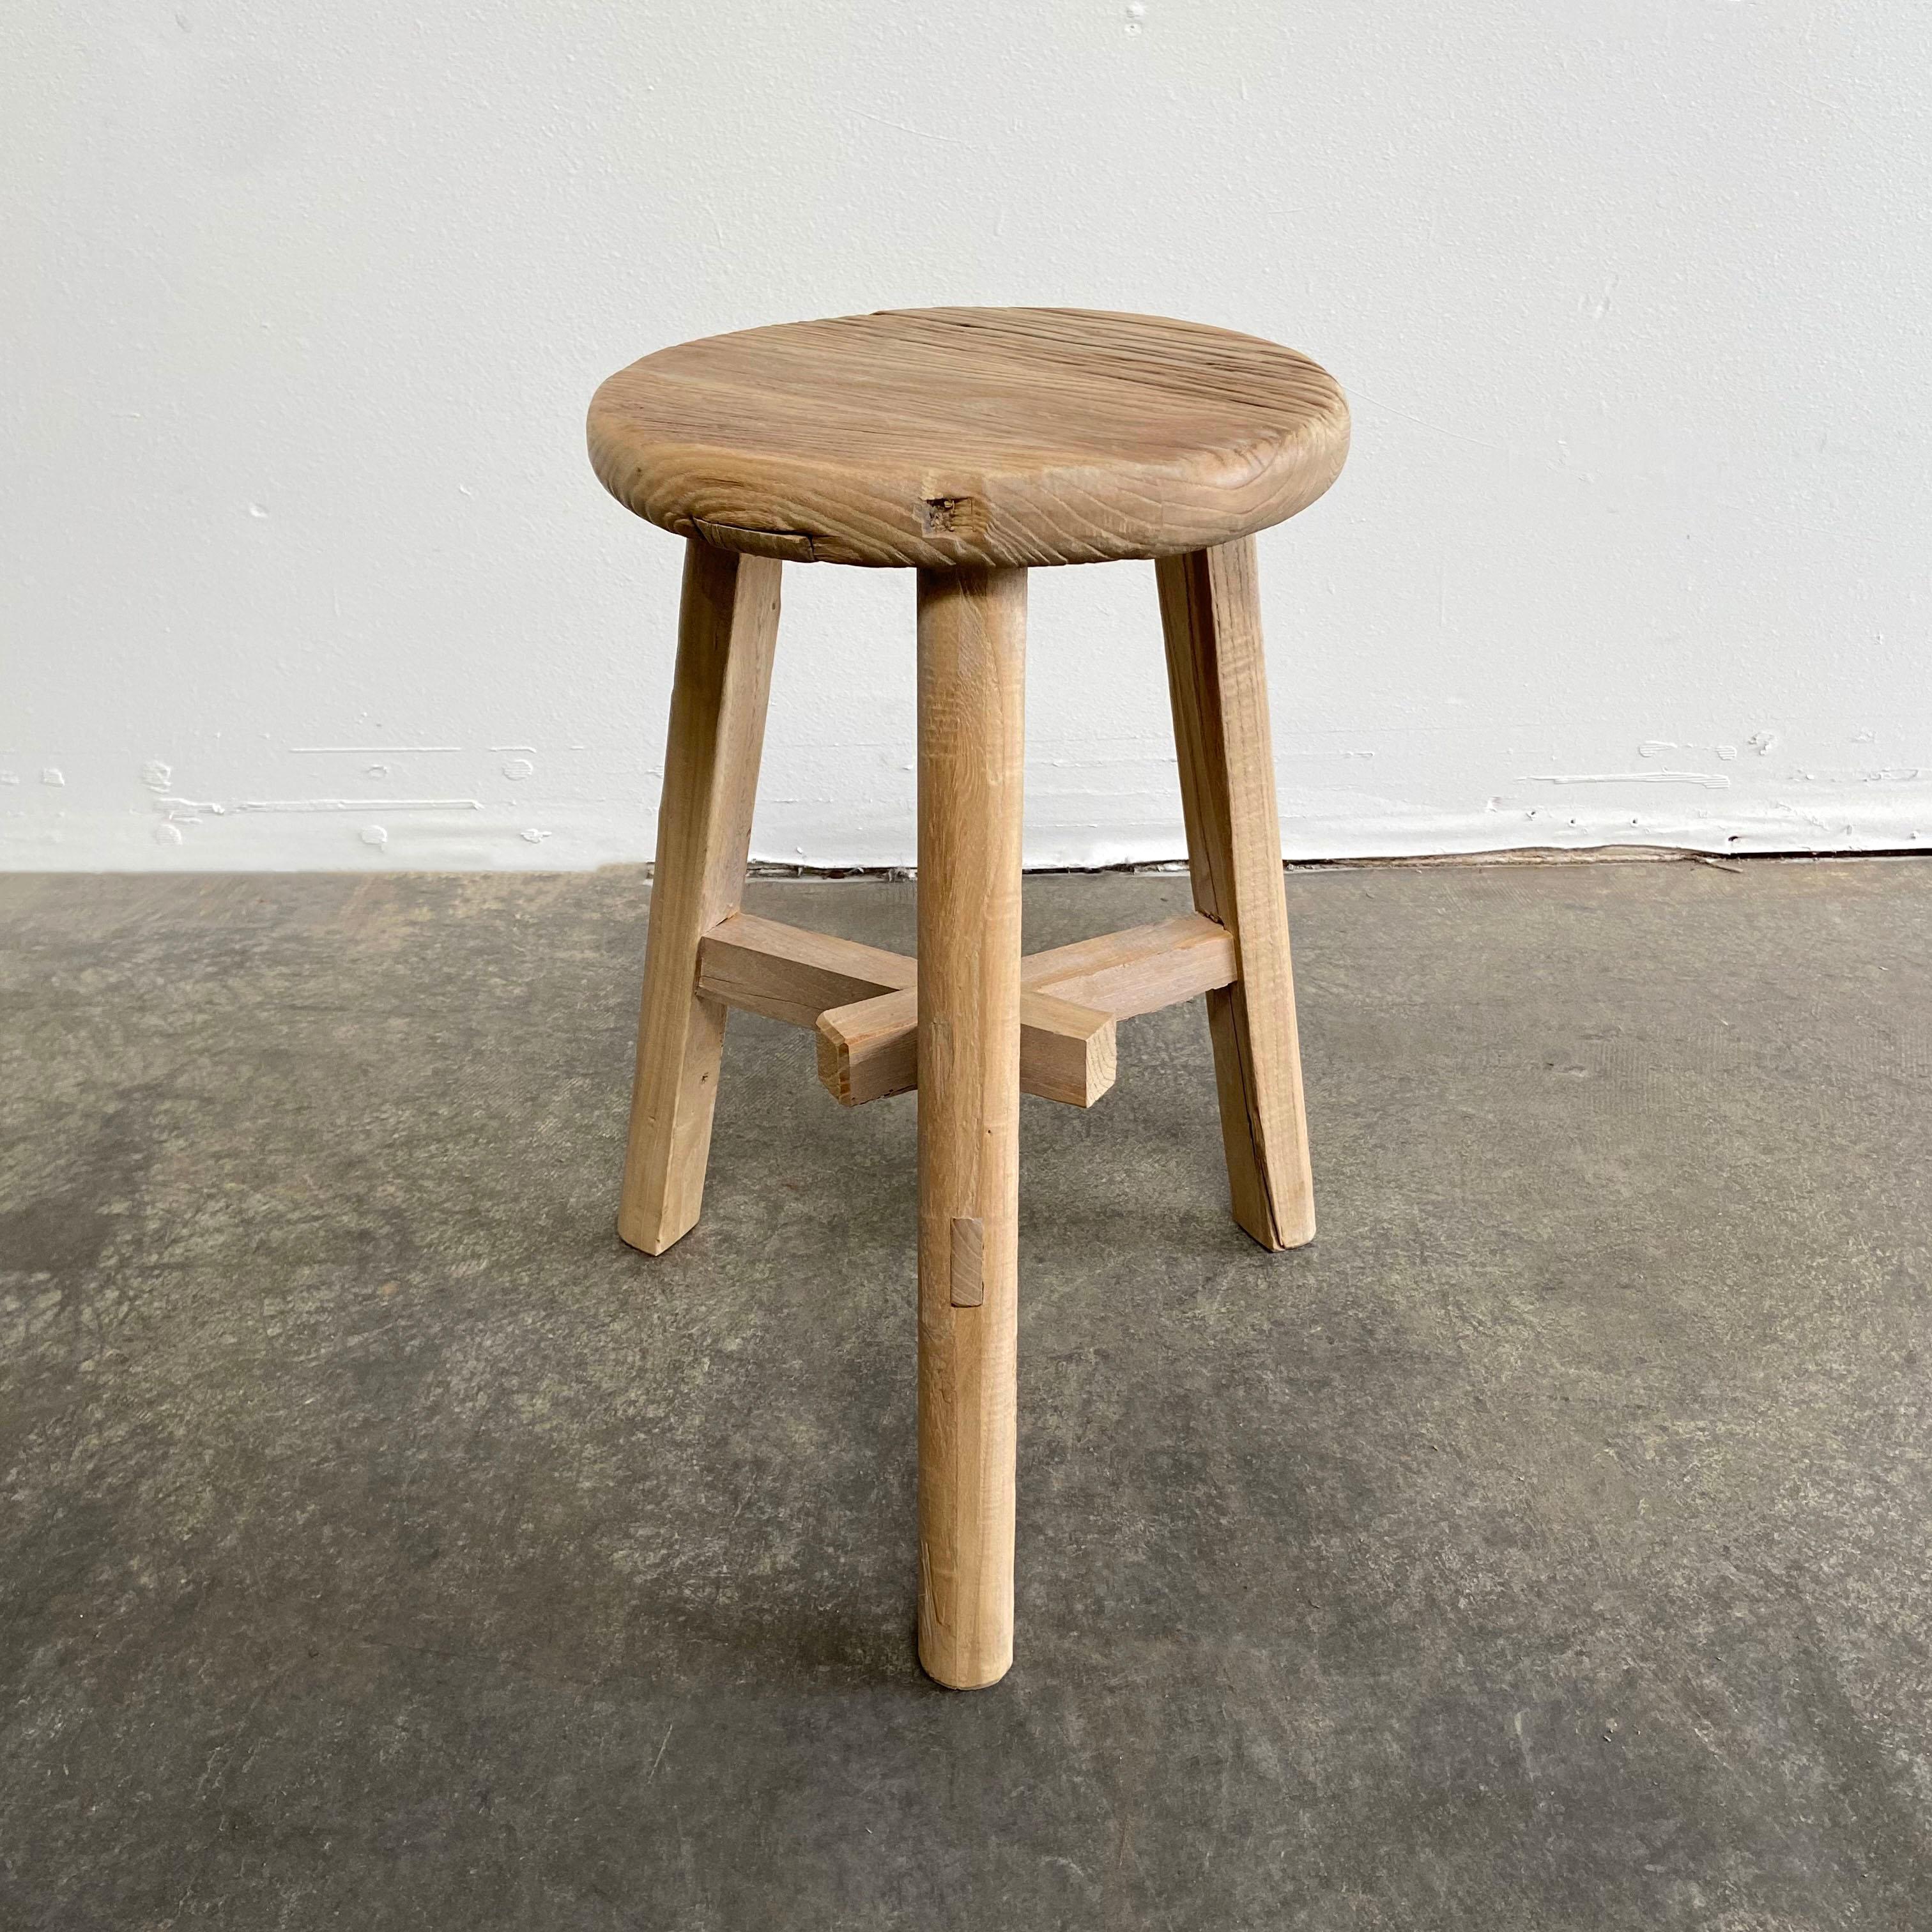 Round elm wood stool
Beautiful antique patina, with weathering and age, these are solid and sturdy ready for daily use, use as a table, stool, drink table, they are great for any space. Each piece is truly unique and one of a kind with different